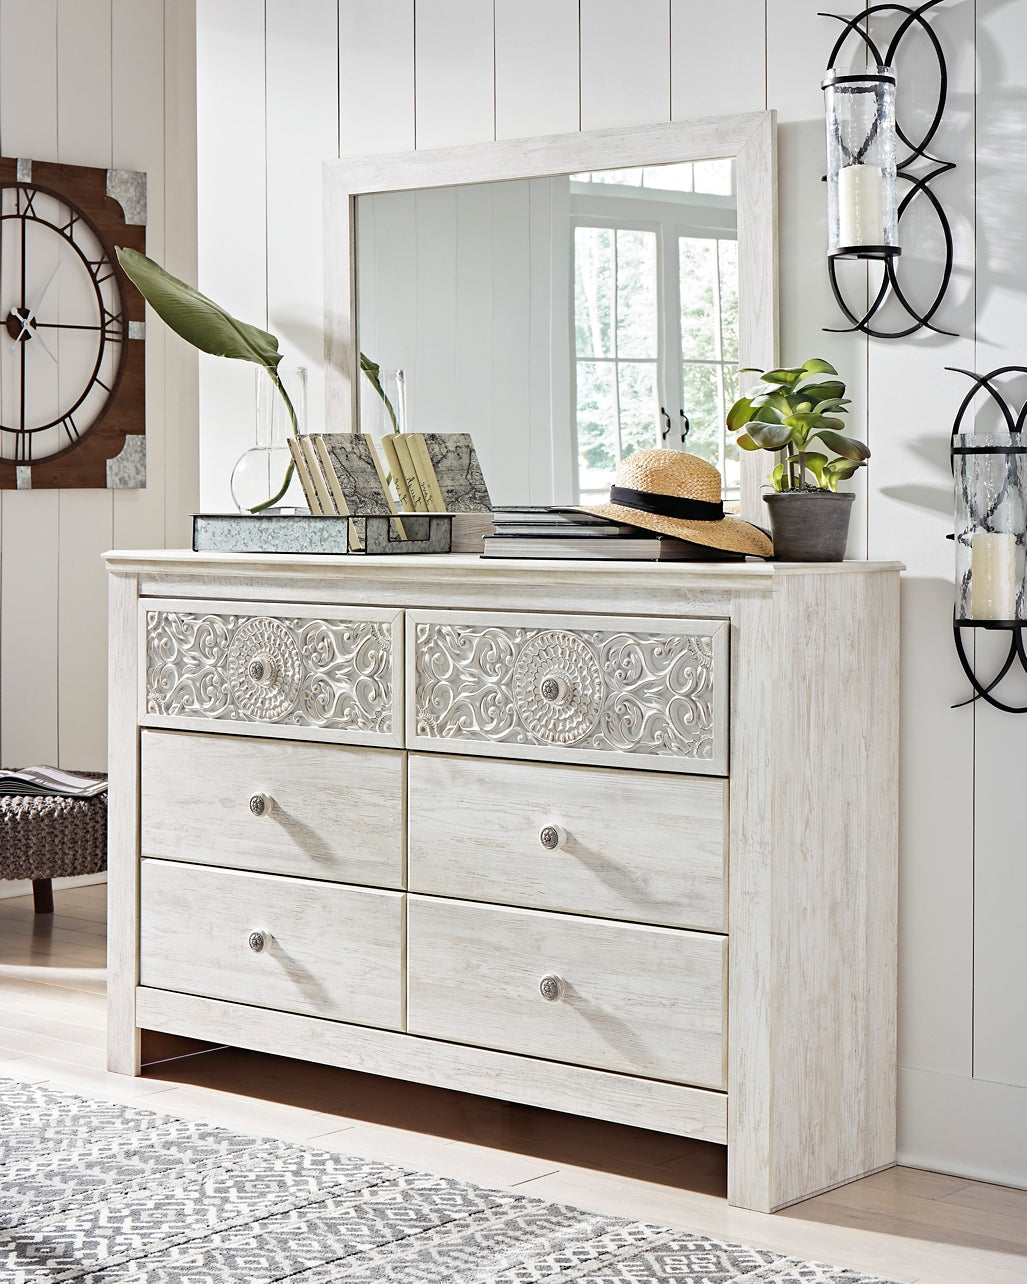 Paxberry Queen Panel Bed with Mirrored Dresser, Chest and Nightstand JB's Furniture  Home Furniture, Home Decor, Furniture Store